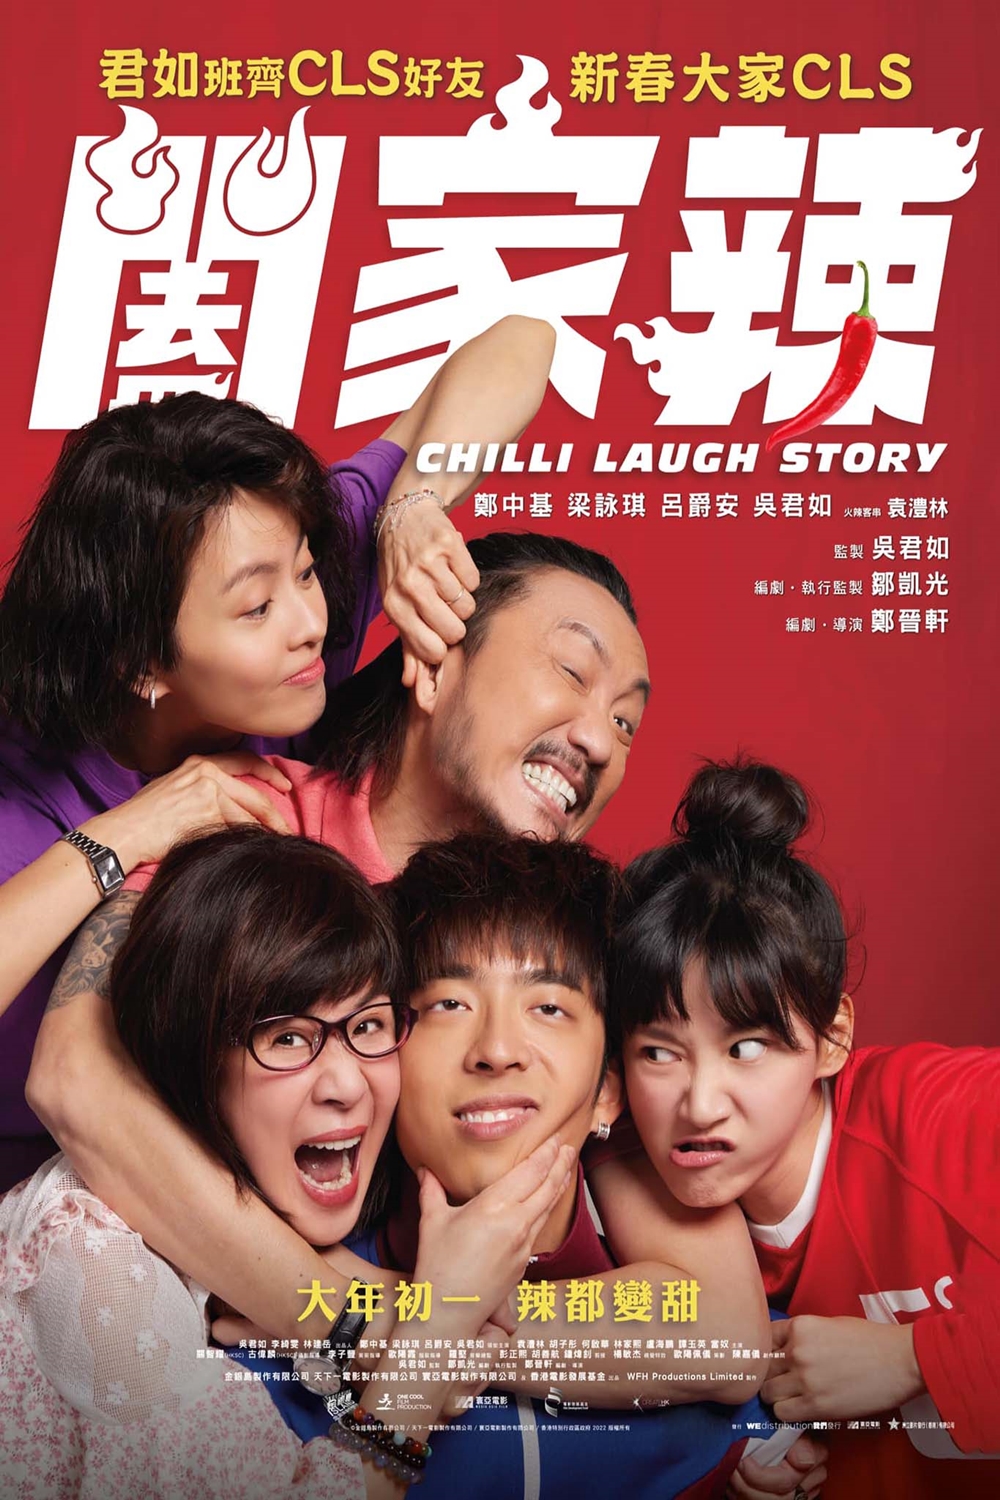 Chilli Laugh Story (Cantonese W/ Eng Subtitles) Poster